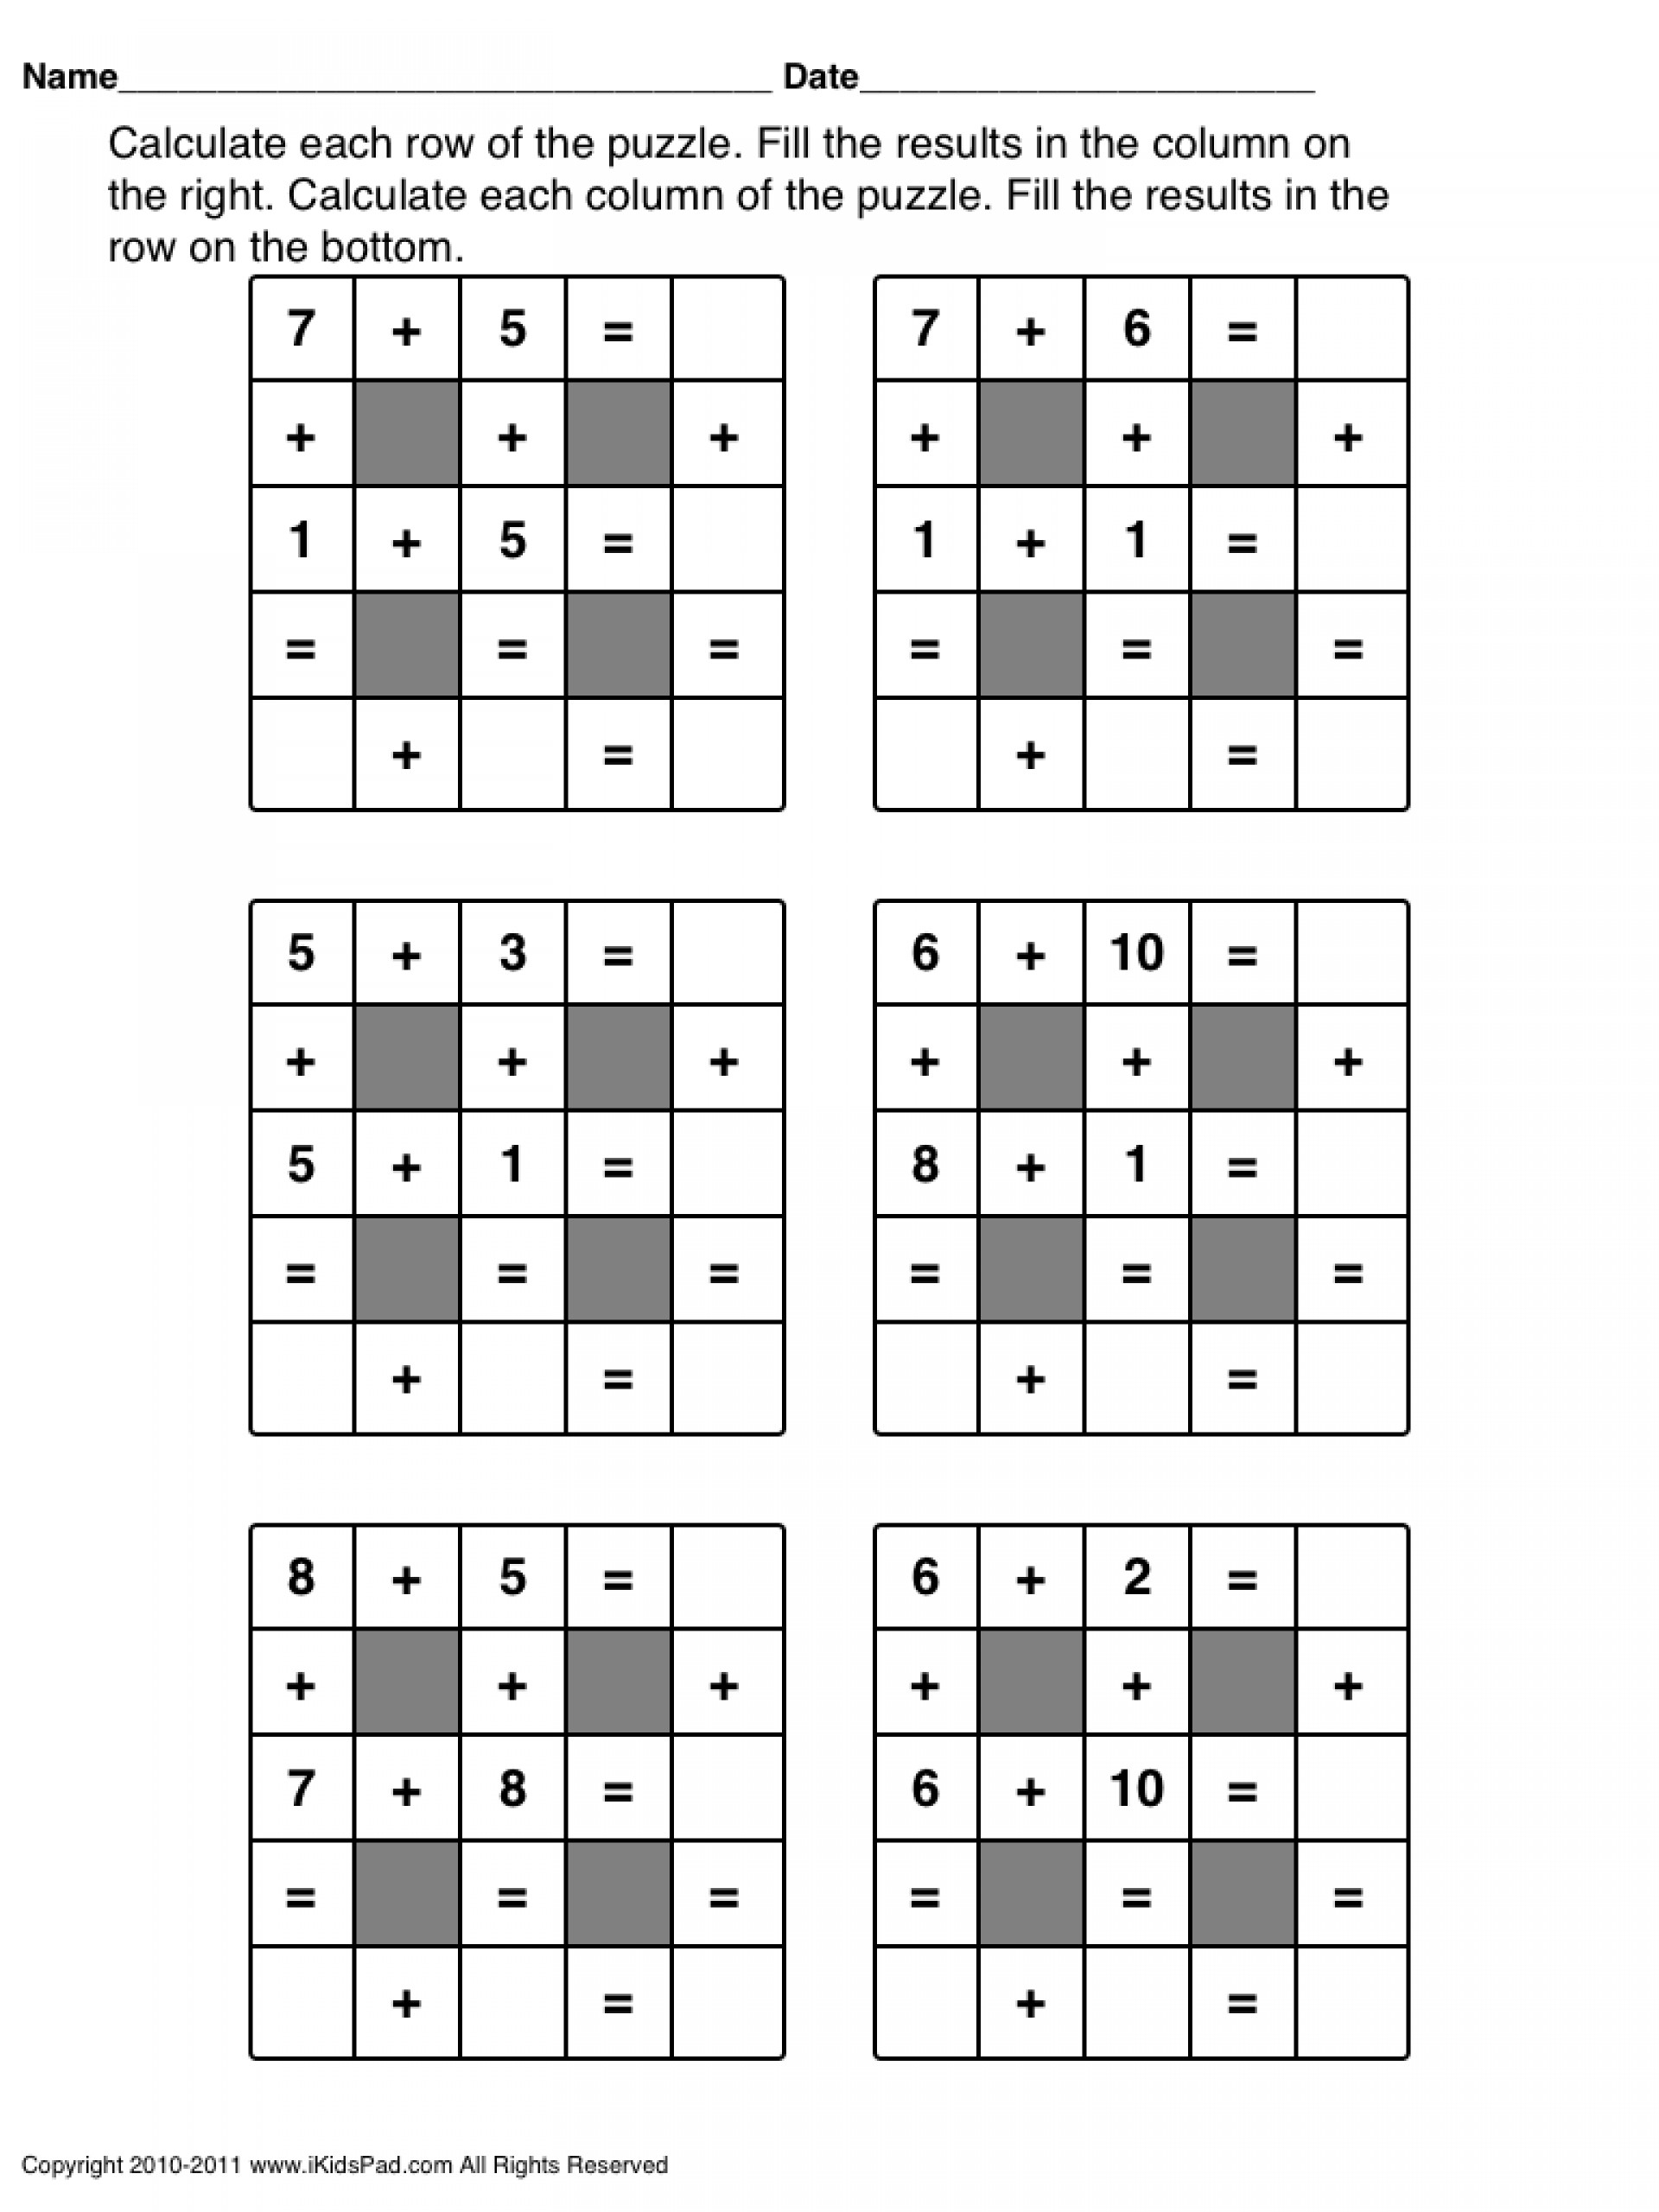 Crosswords Fun Maths For 2Nd And 3Rd Graders Free Printable Second - Free Printable Thanksgiving Math Worksheets For 3Rd Grade